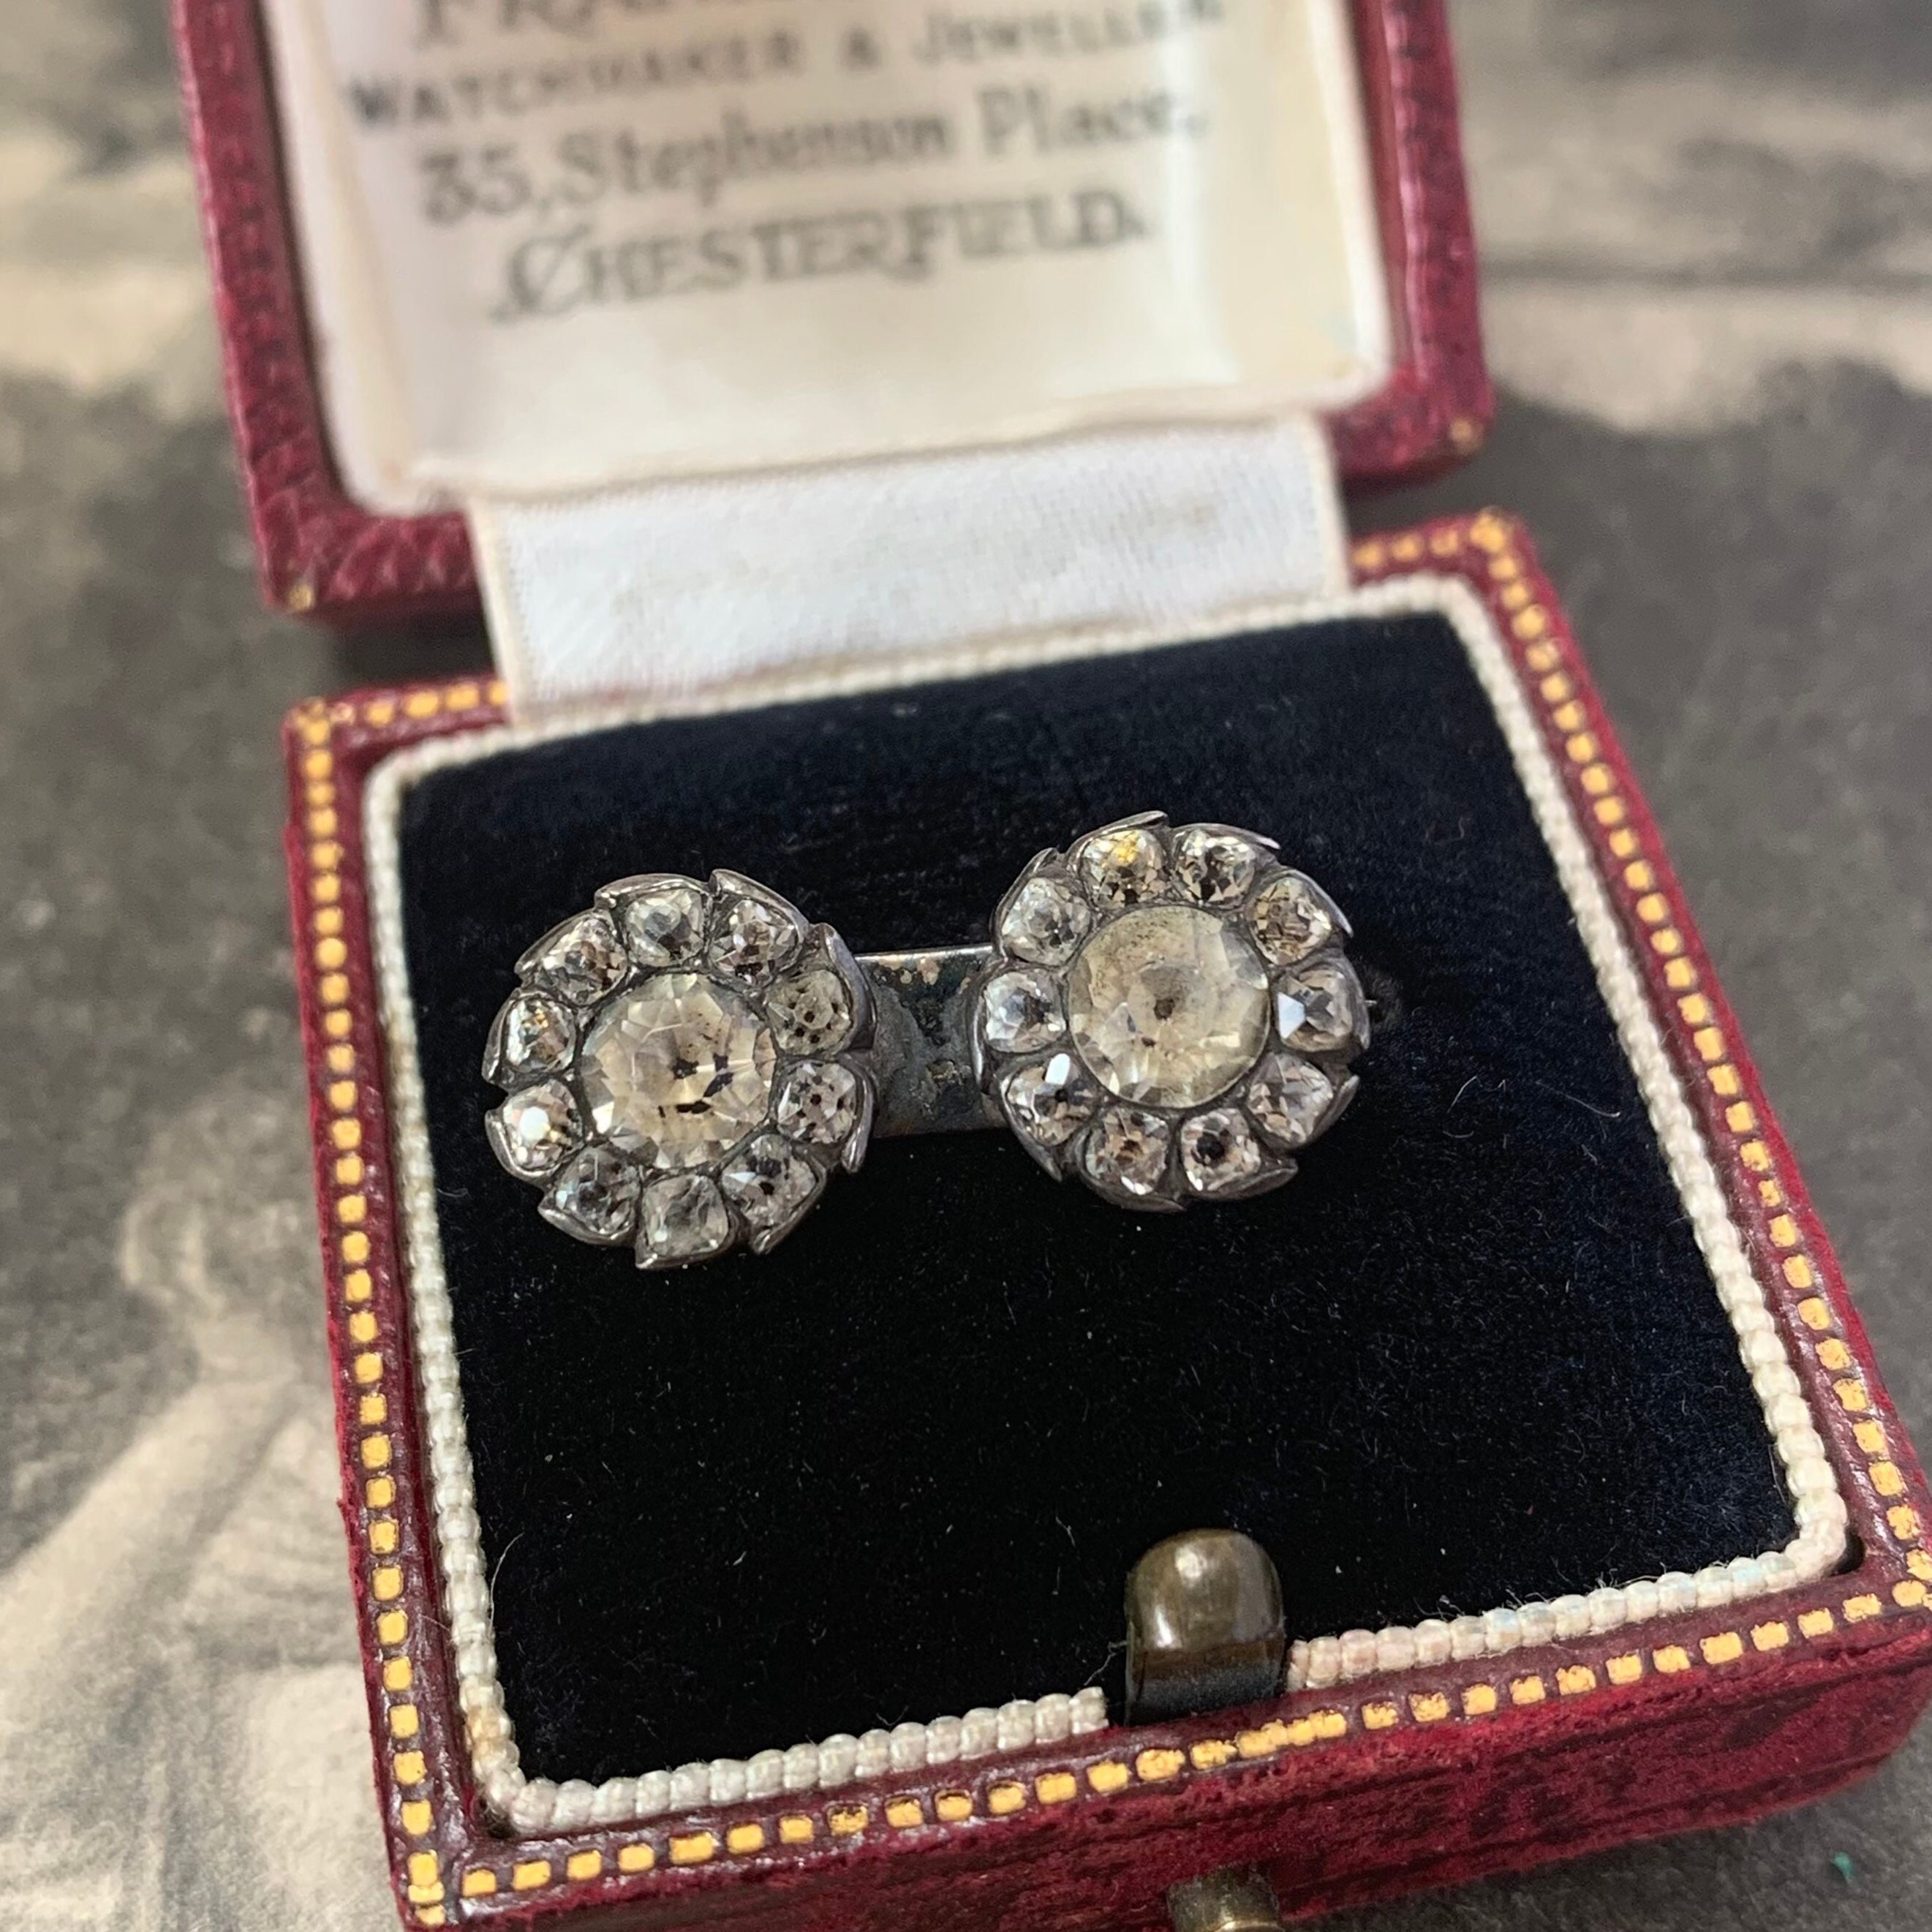 This Exquisite Antique Silver Brooch Features A Charming Double Flower Design Adorned With Elegant Black Dot Paste Diamonds